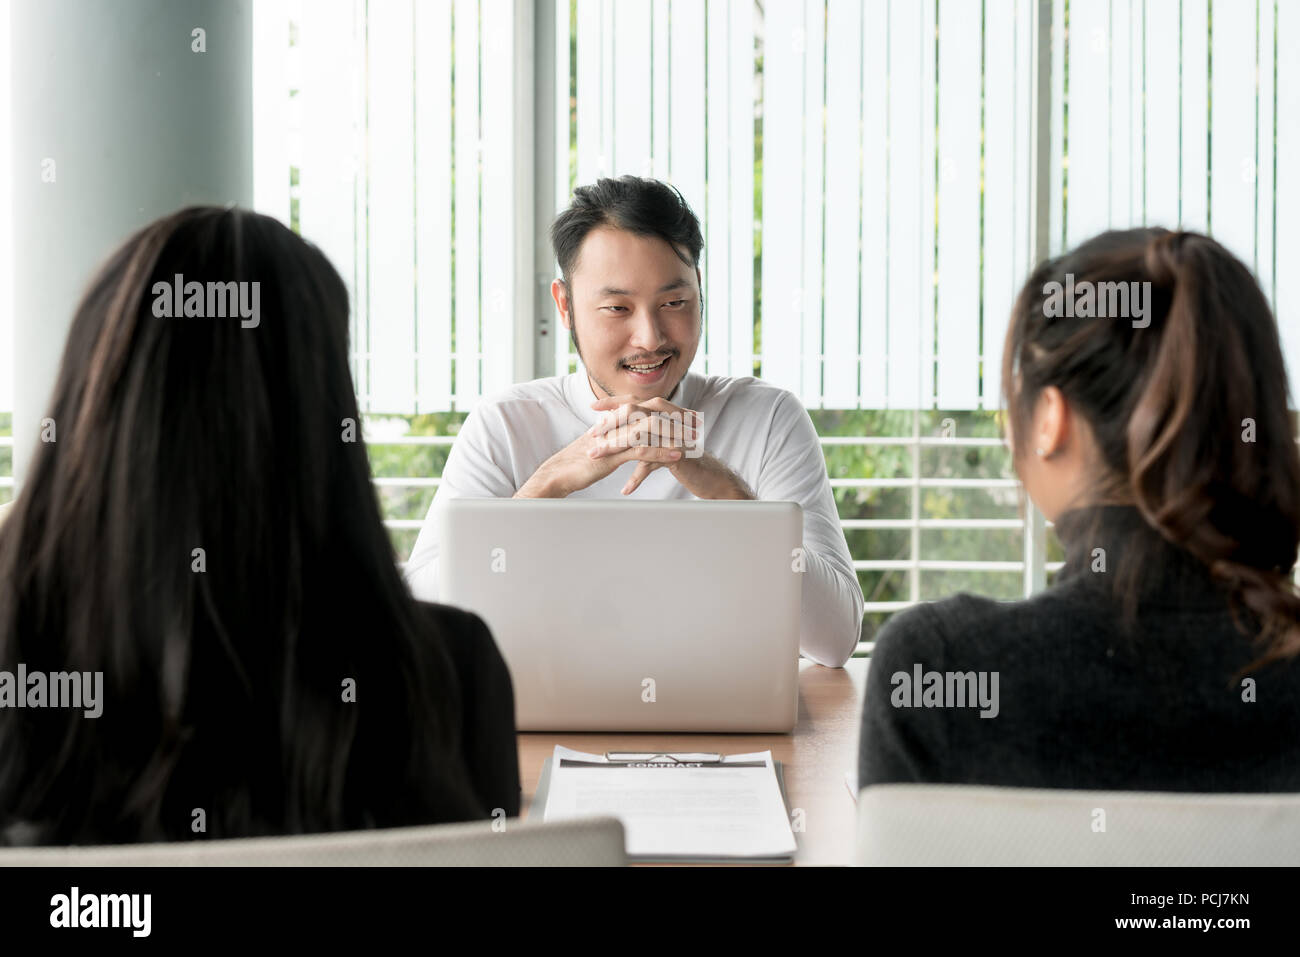 Job interview - Photo of Asian businessman applicant during listen to candidate answers. Stock Photo